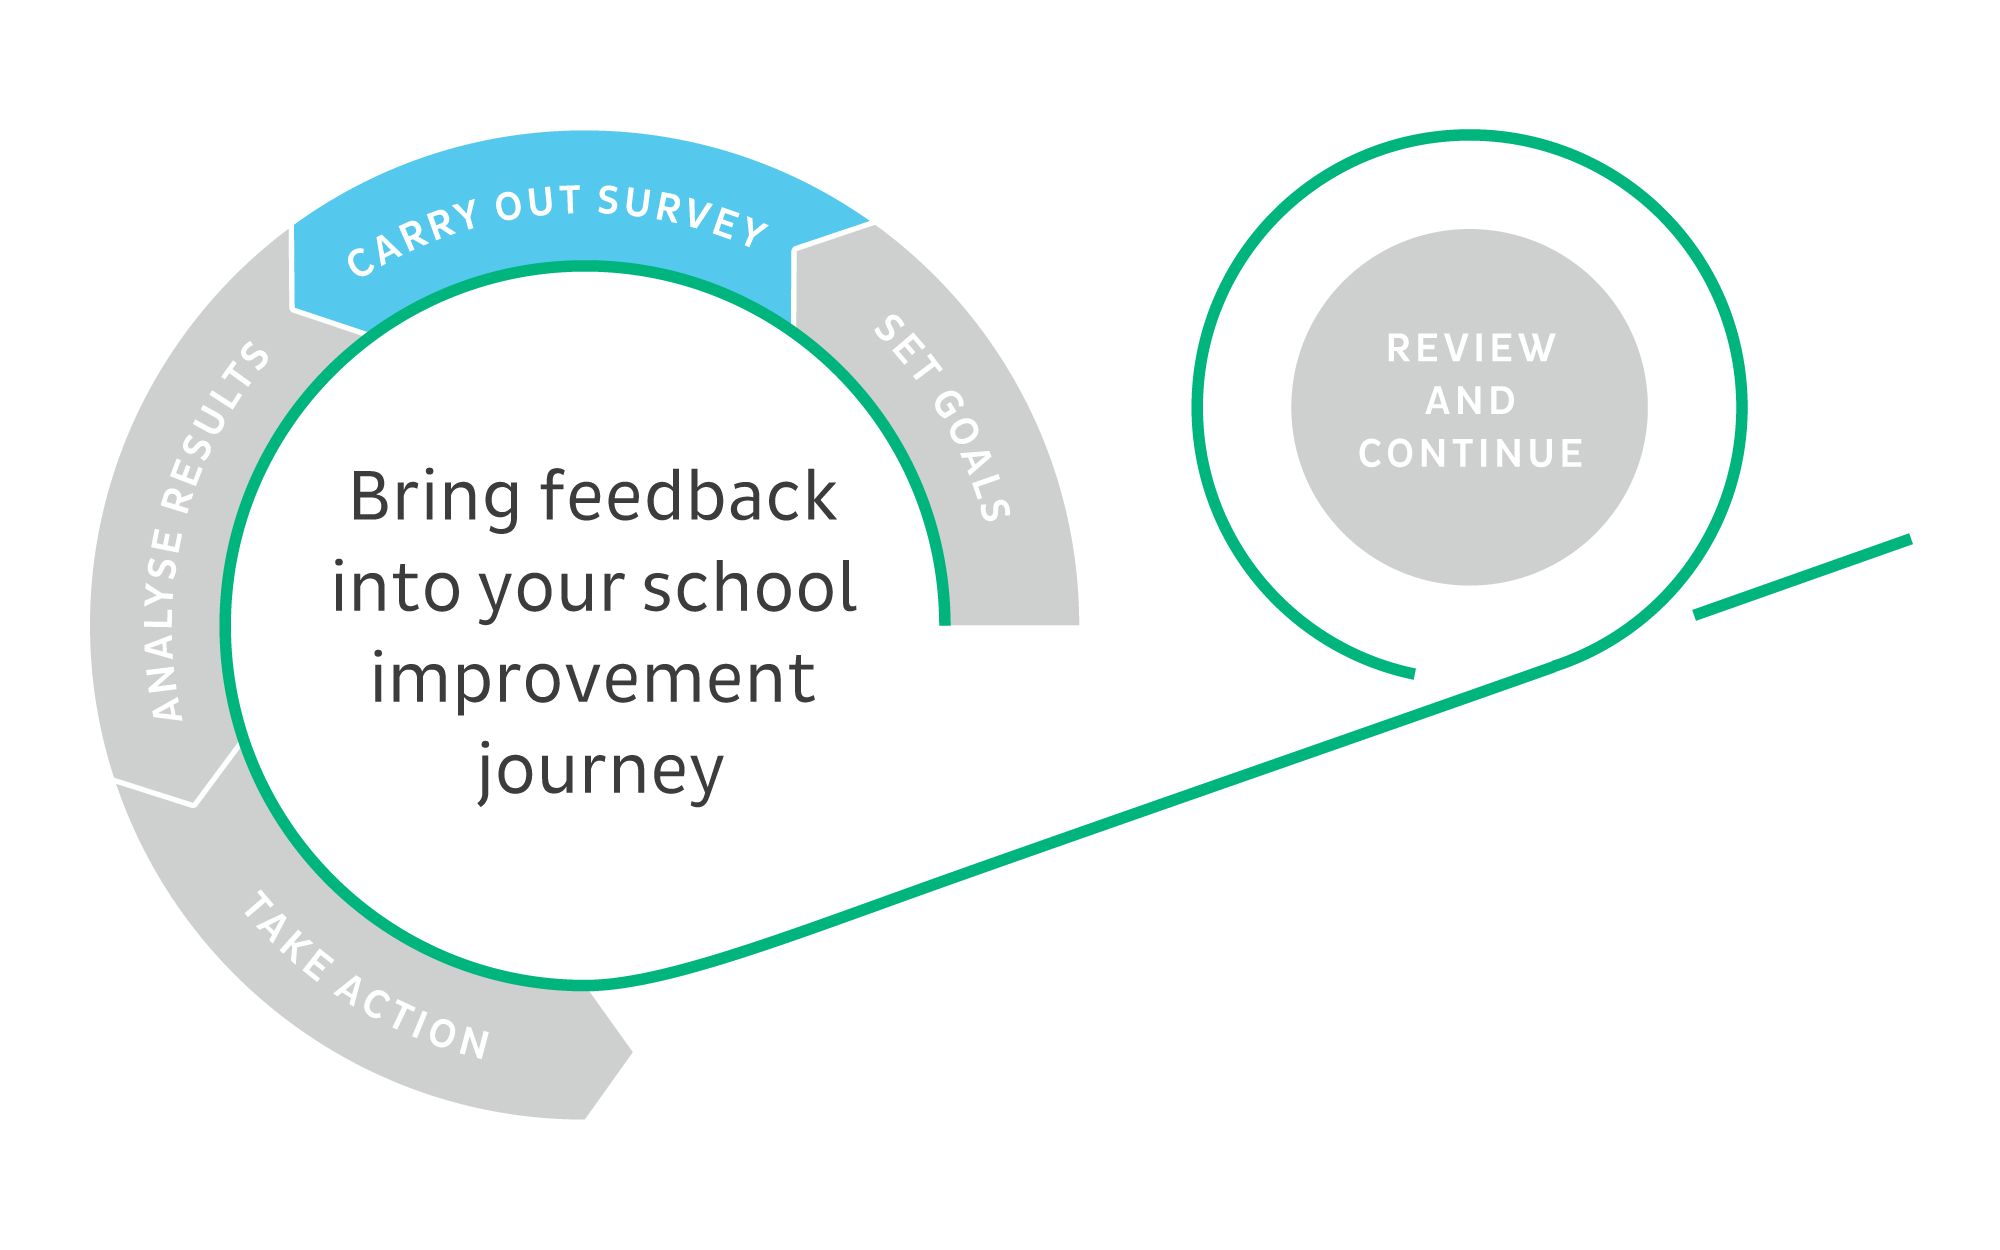 Cycle-circle-visualisation_bring-feedback-into-your-school-improvement-journey-carry-out-survey